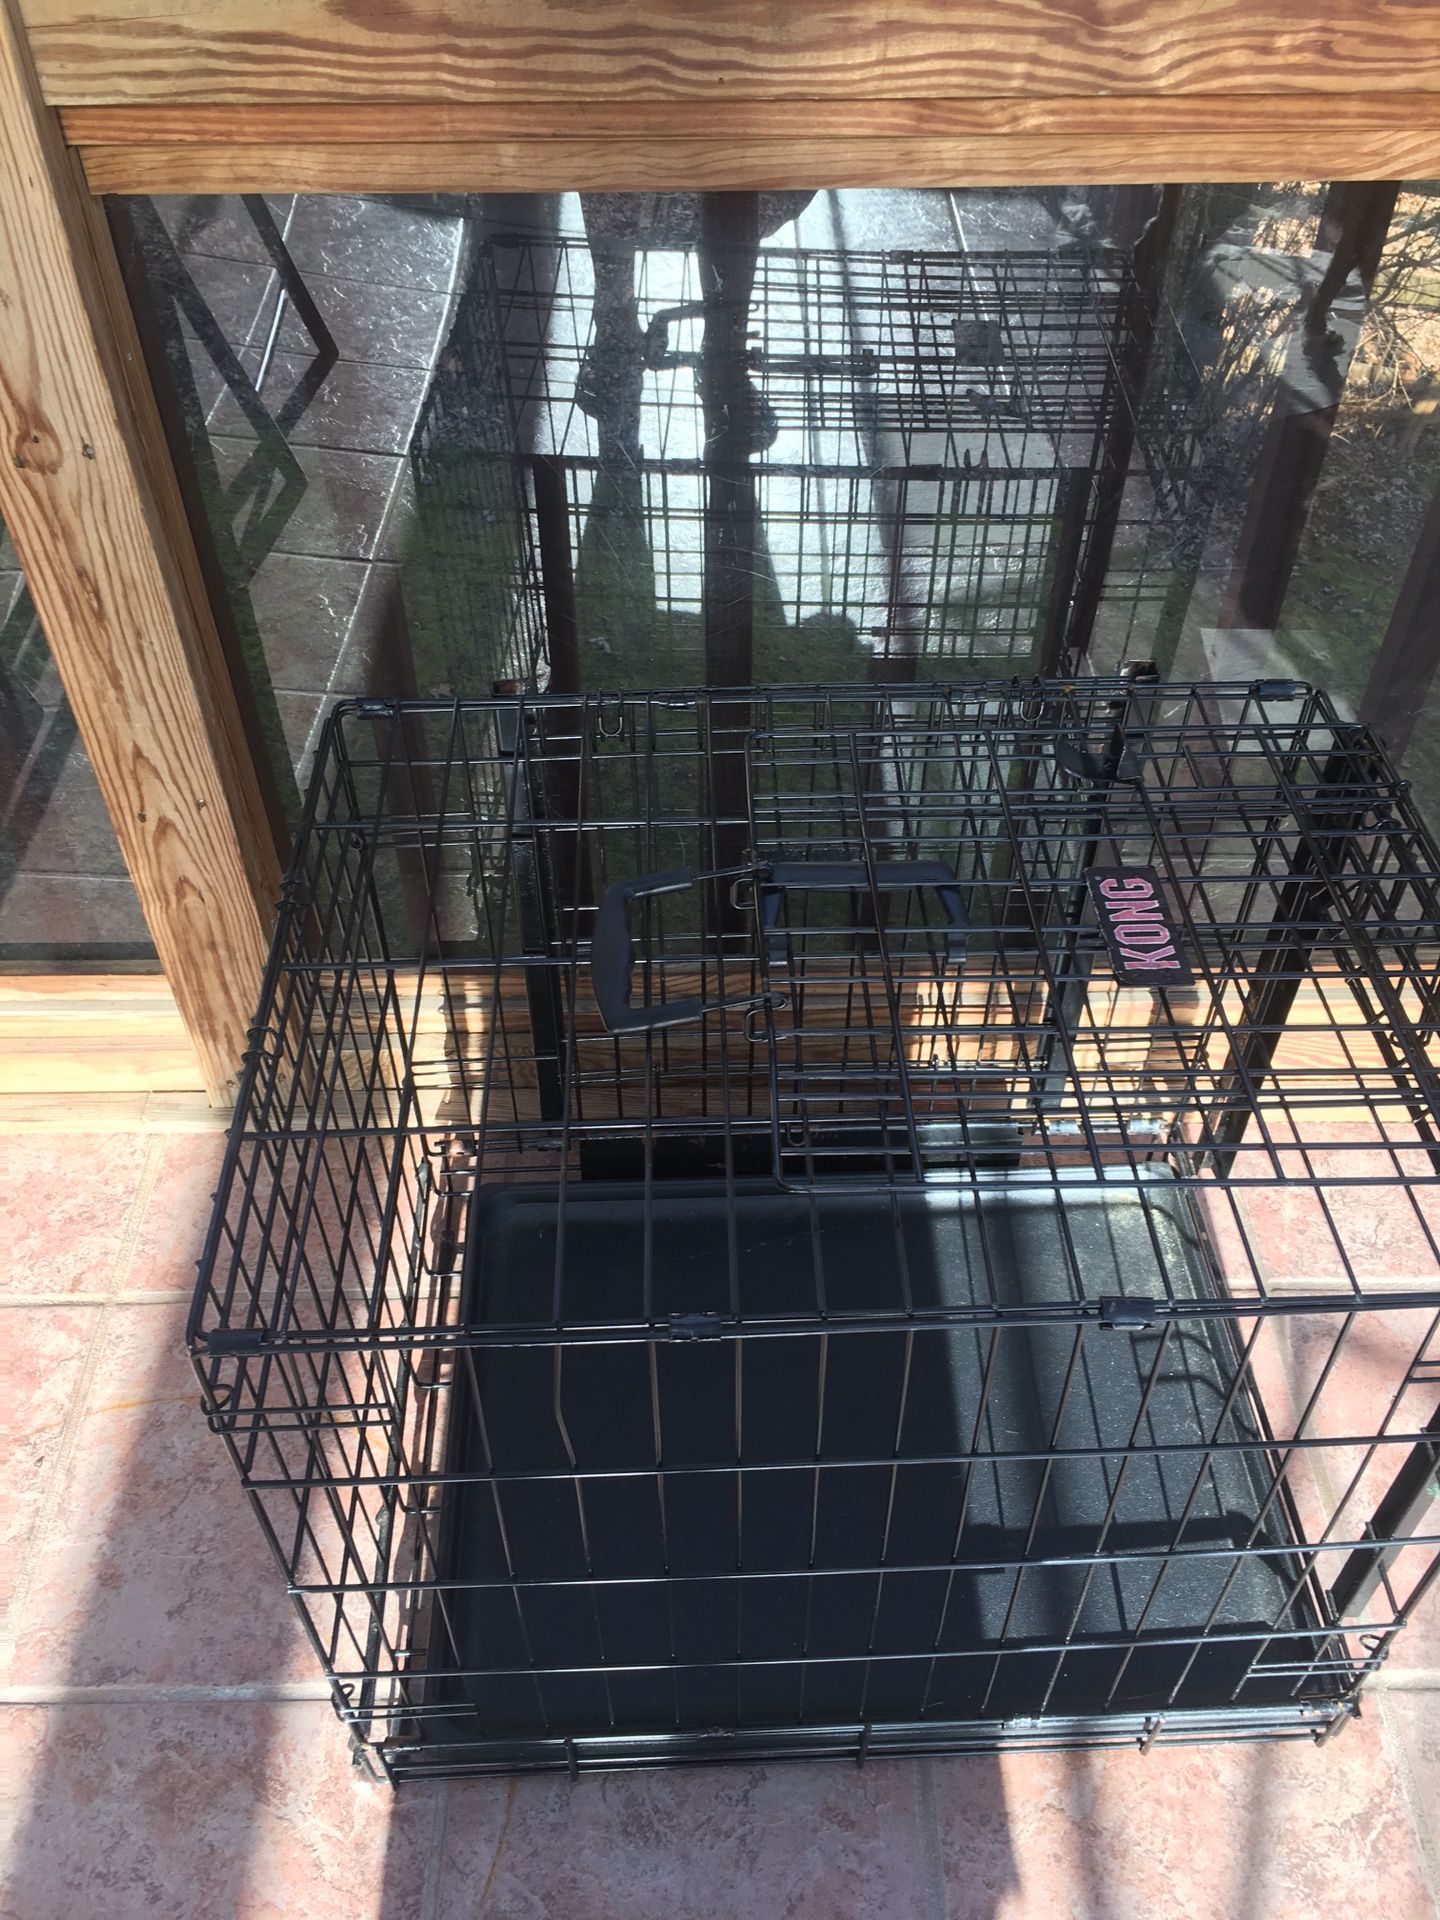 Kong dog cage 1 ft 9 inches tall, 1 ft 7 inches wide with divider piece